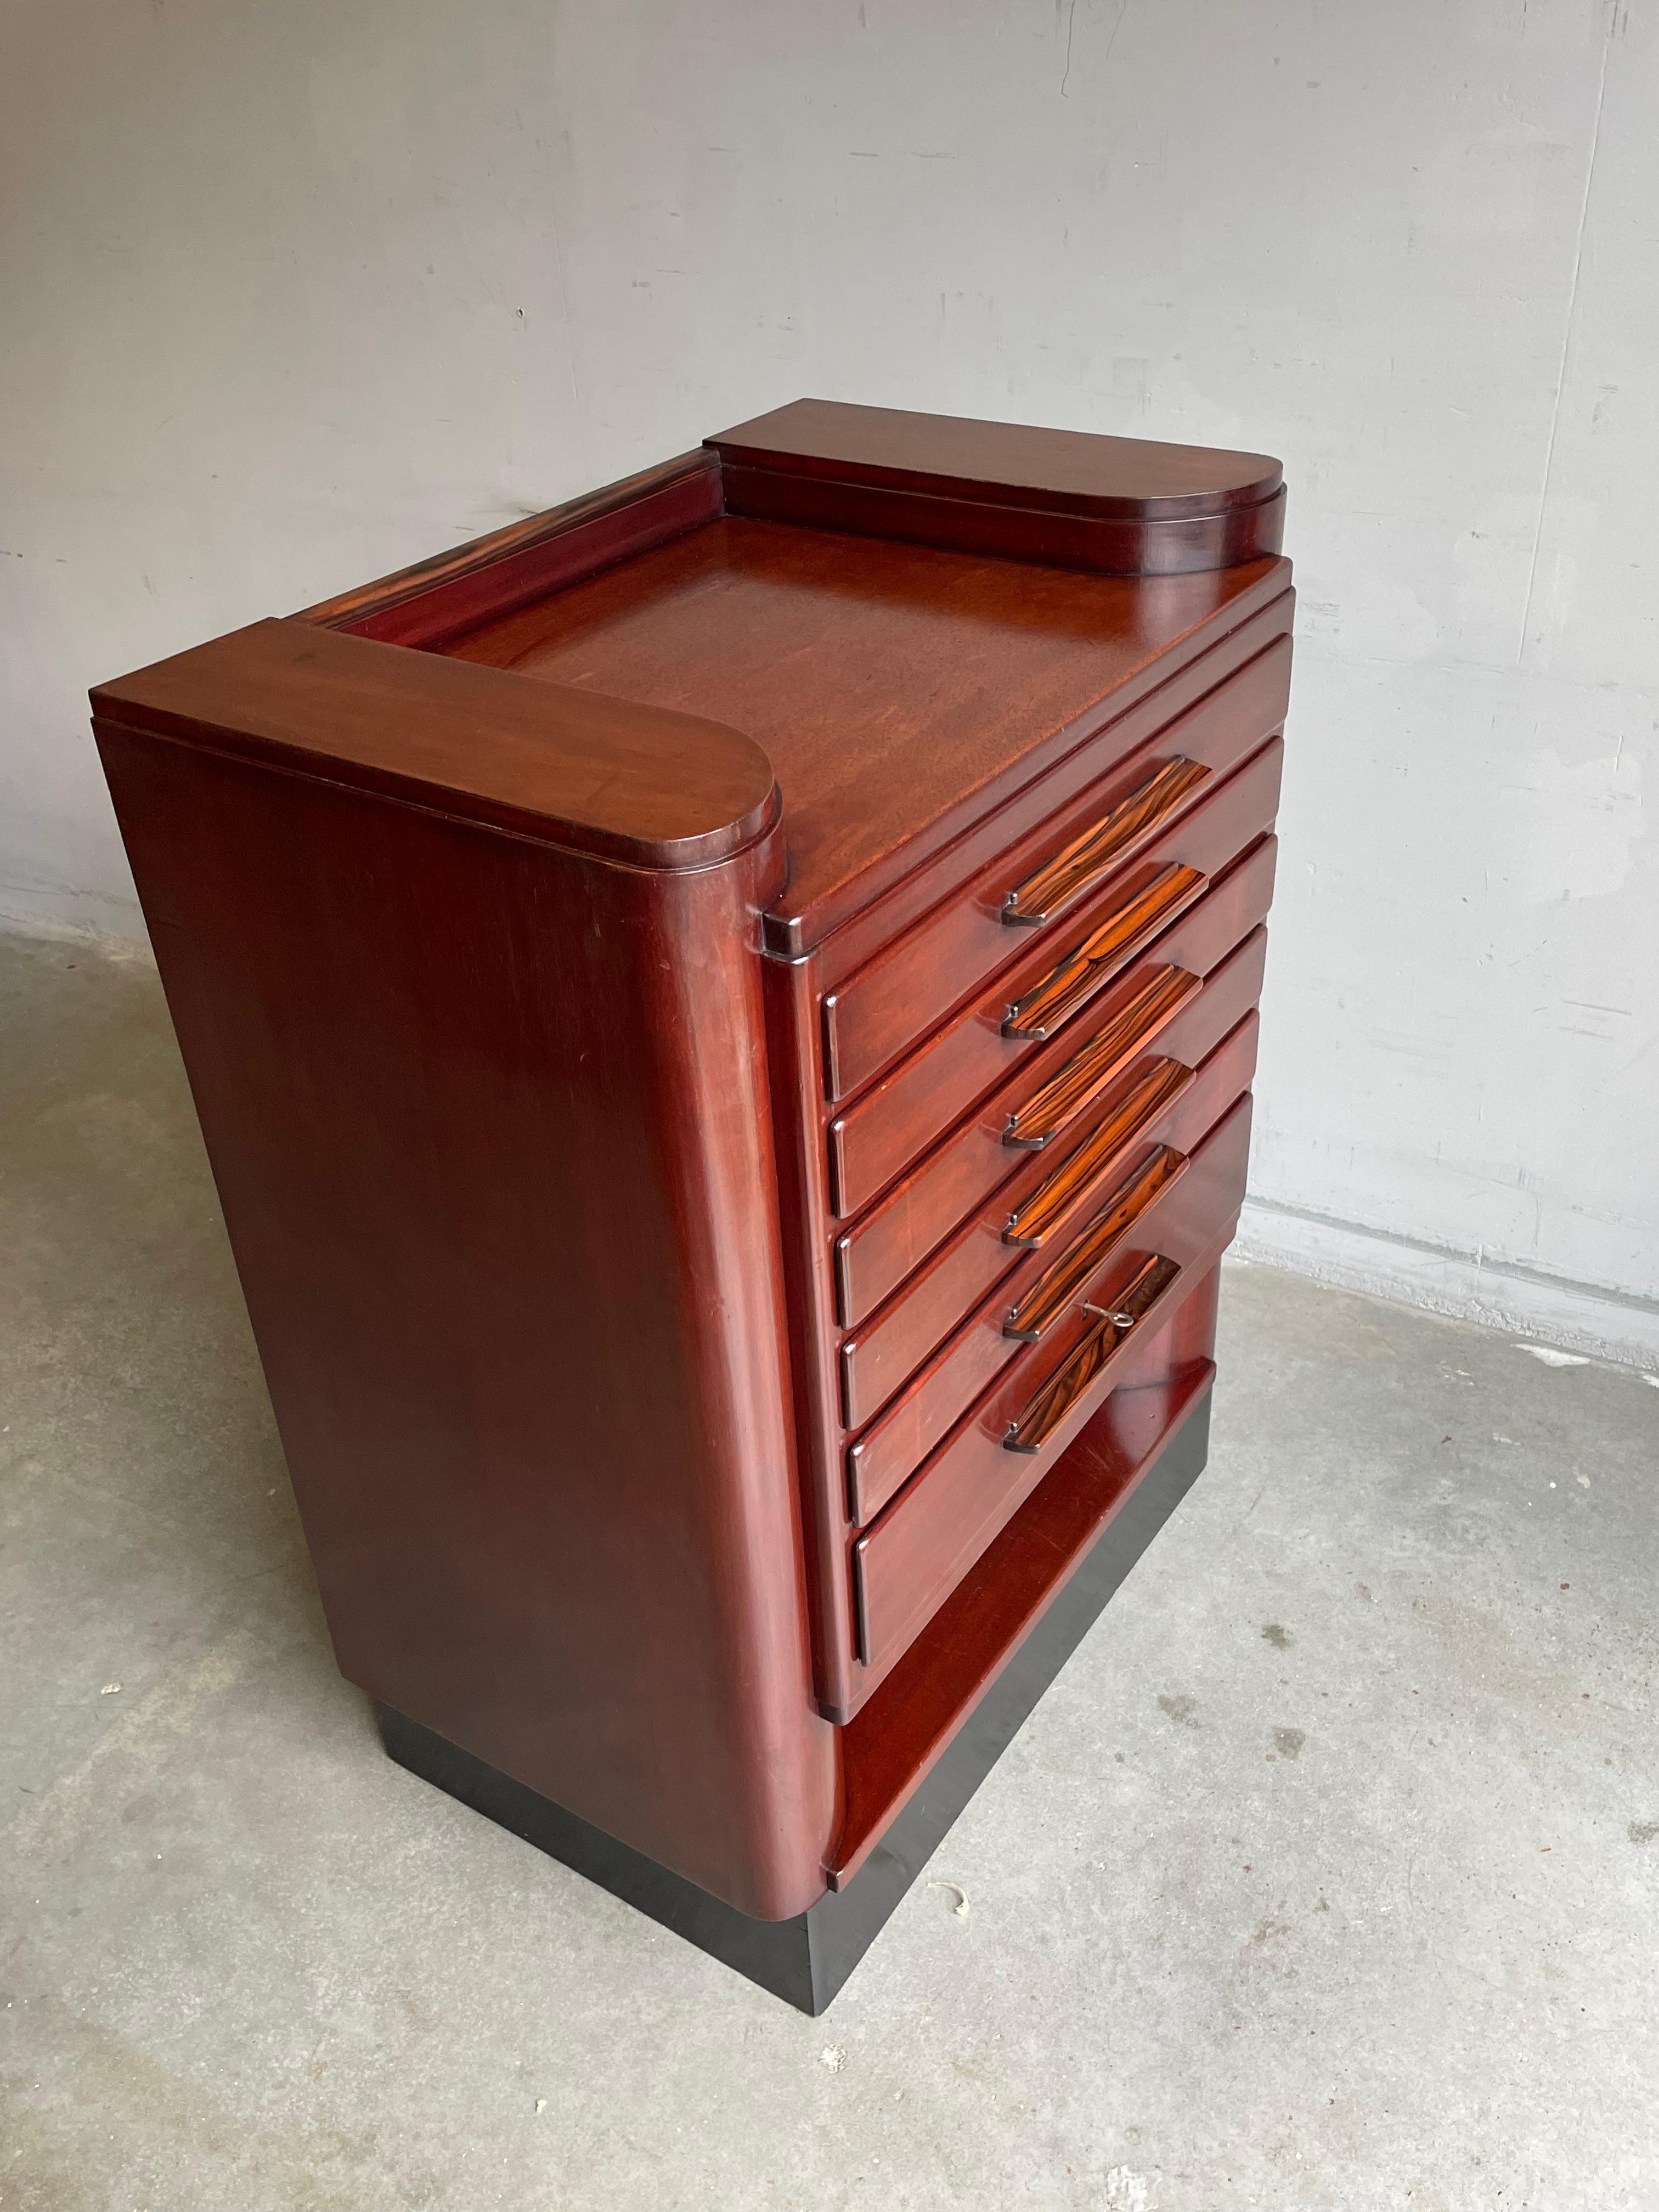 Beautifully designed AND executed, Dutch Art Deco chest with stunning drawers and handles.

Having been antique furniture sellers for the first half of our antique selling careers, we immediately recognized this rare and striking chest of drawers.